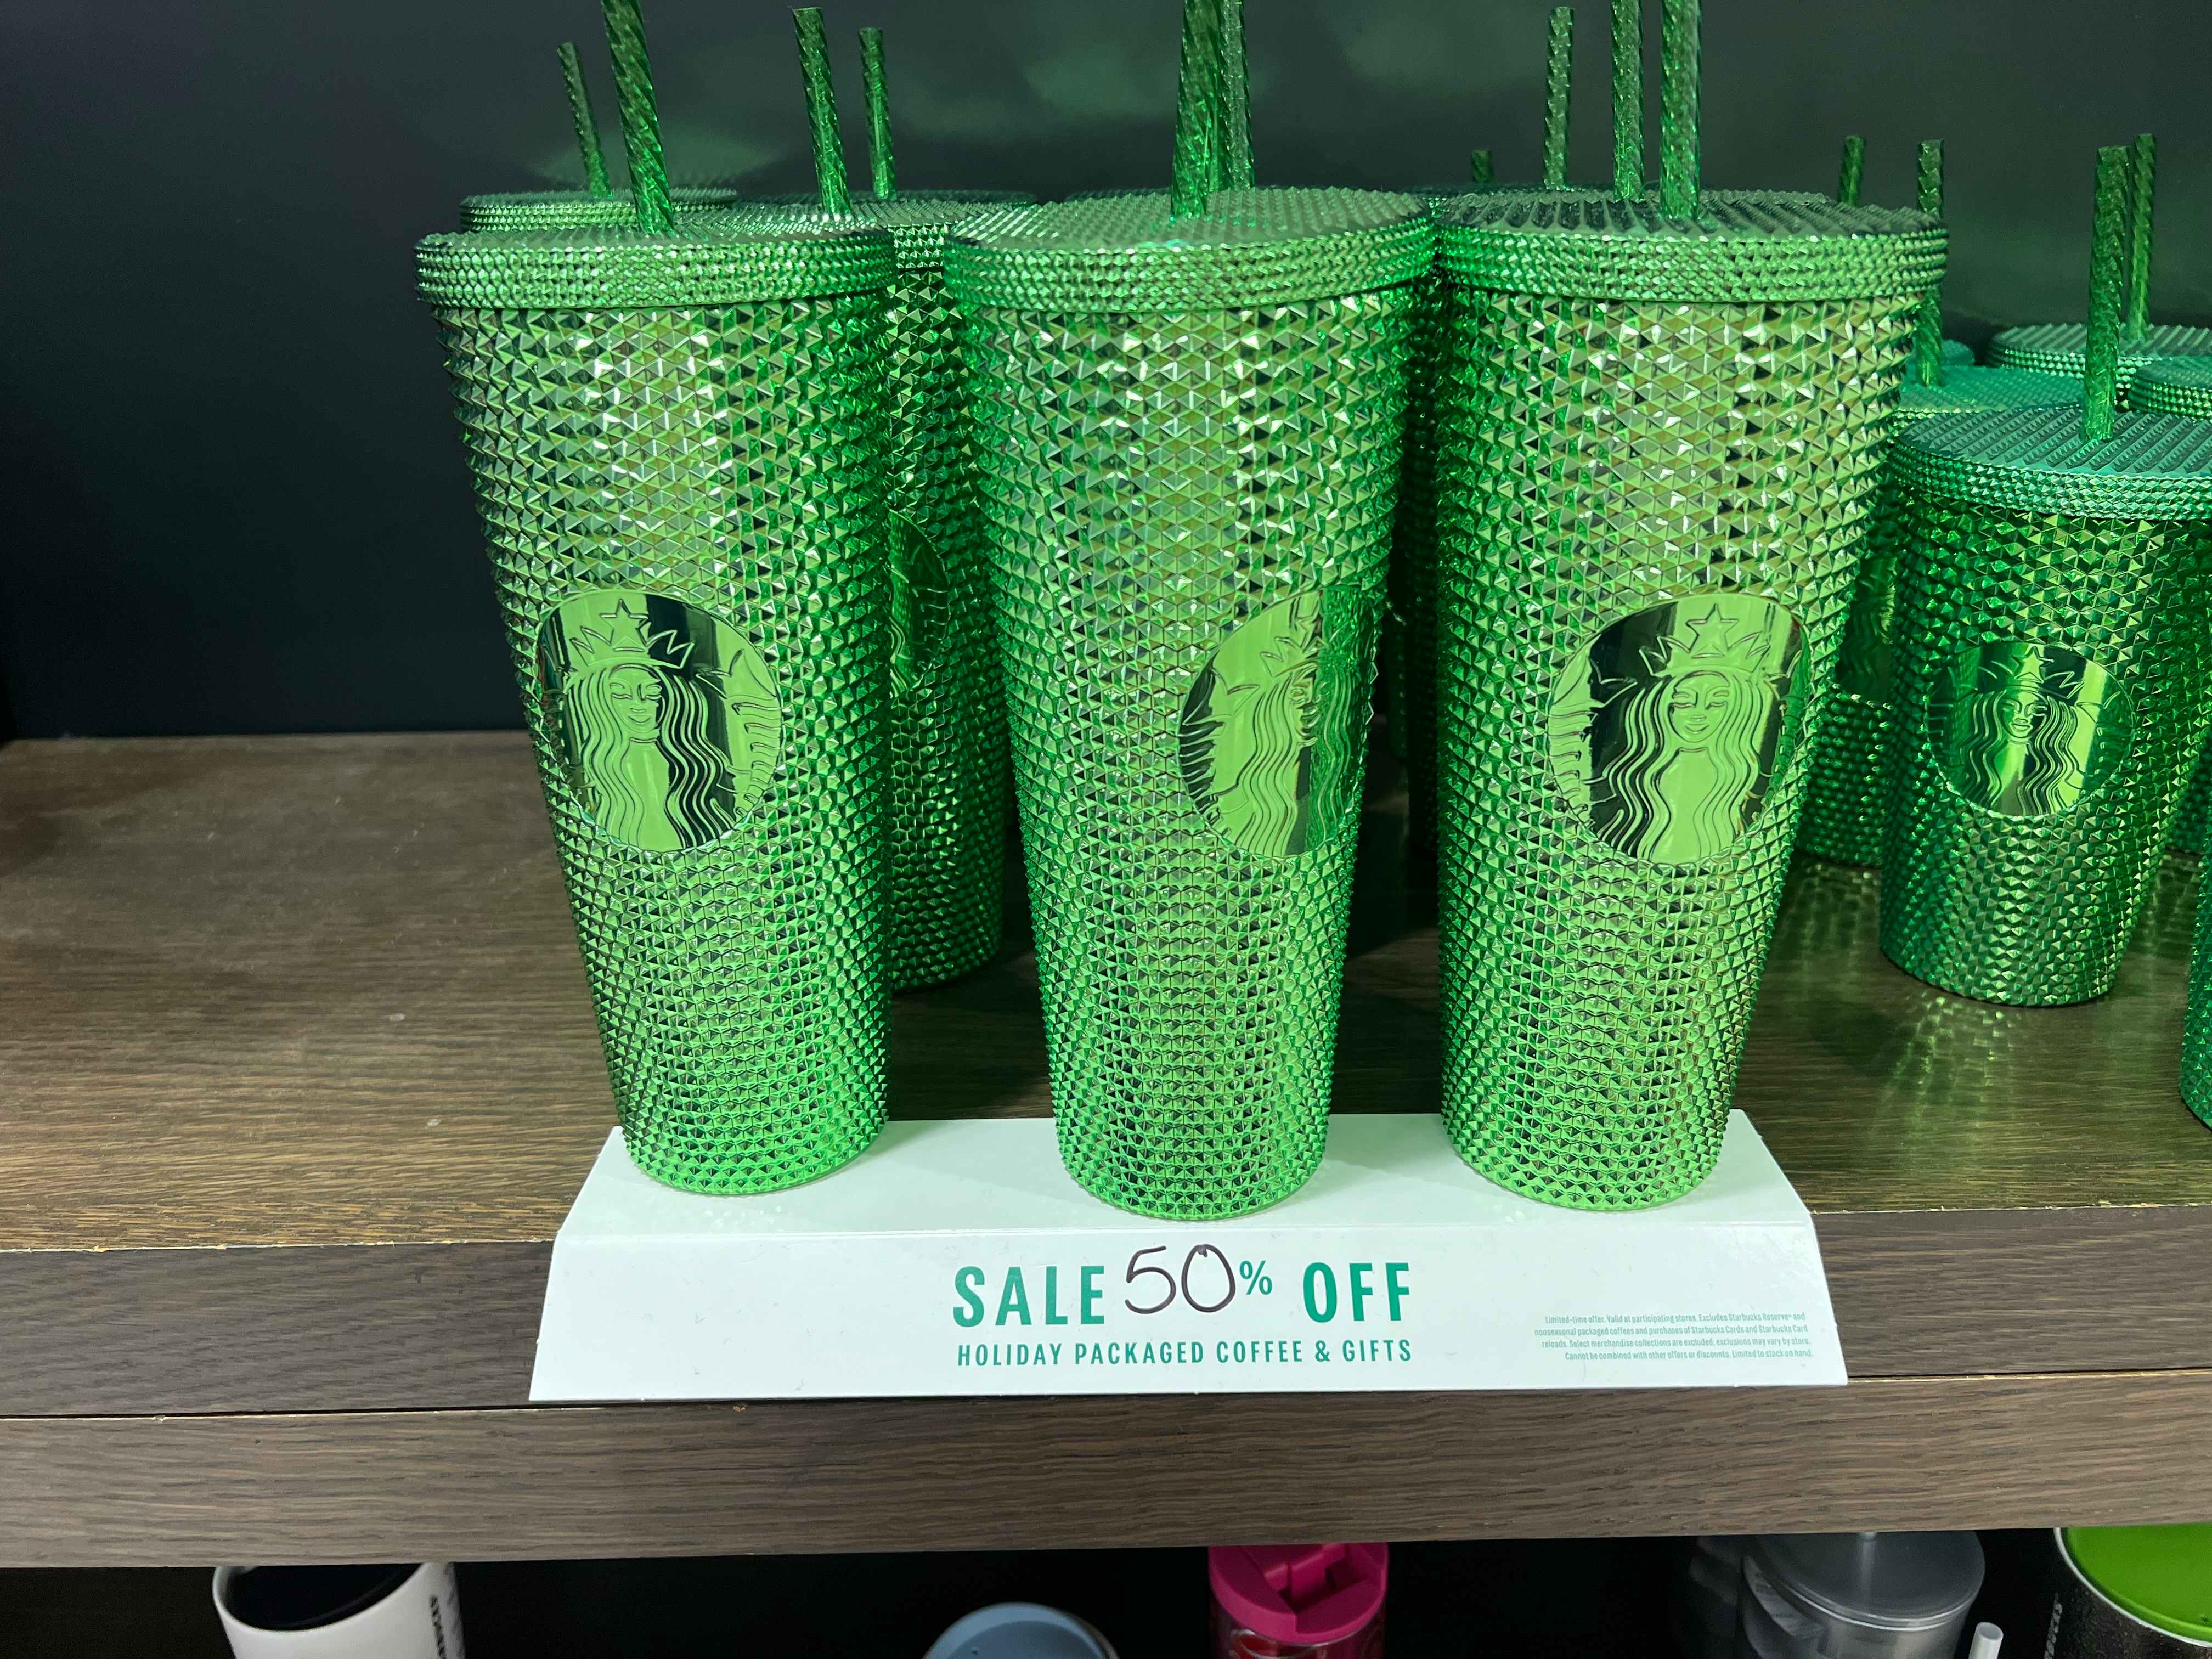 https://prod-cdn-thekrazycouponlady.imgix.net/wp-content/uploads/2023/12/starbucks-winter-cups-green-crystal-tumblers-50-off-1702915374-1702915374.jpg?auto=format&fit=fill&q=25